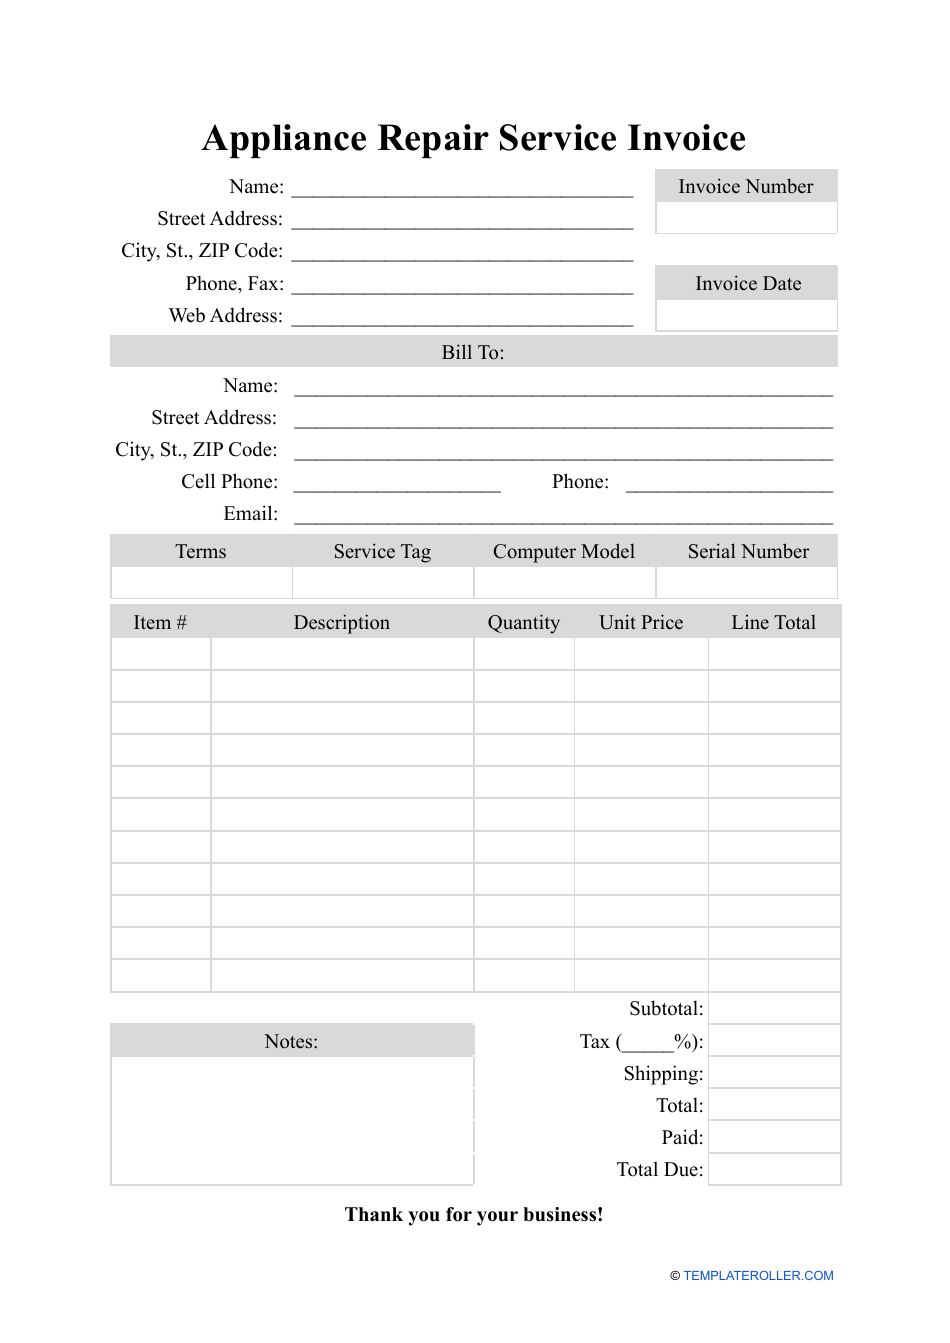 Appliance Repair Service Invoice Template Fill Out Sign Online and